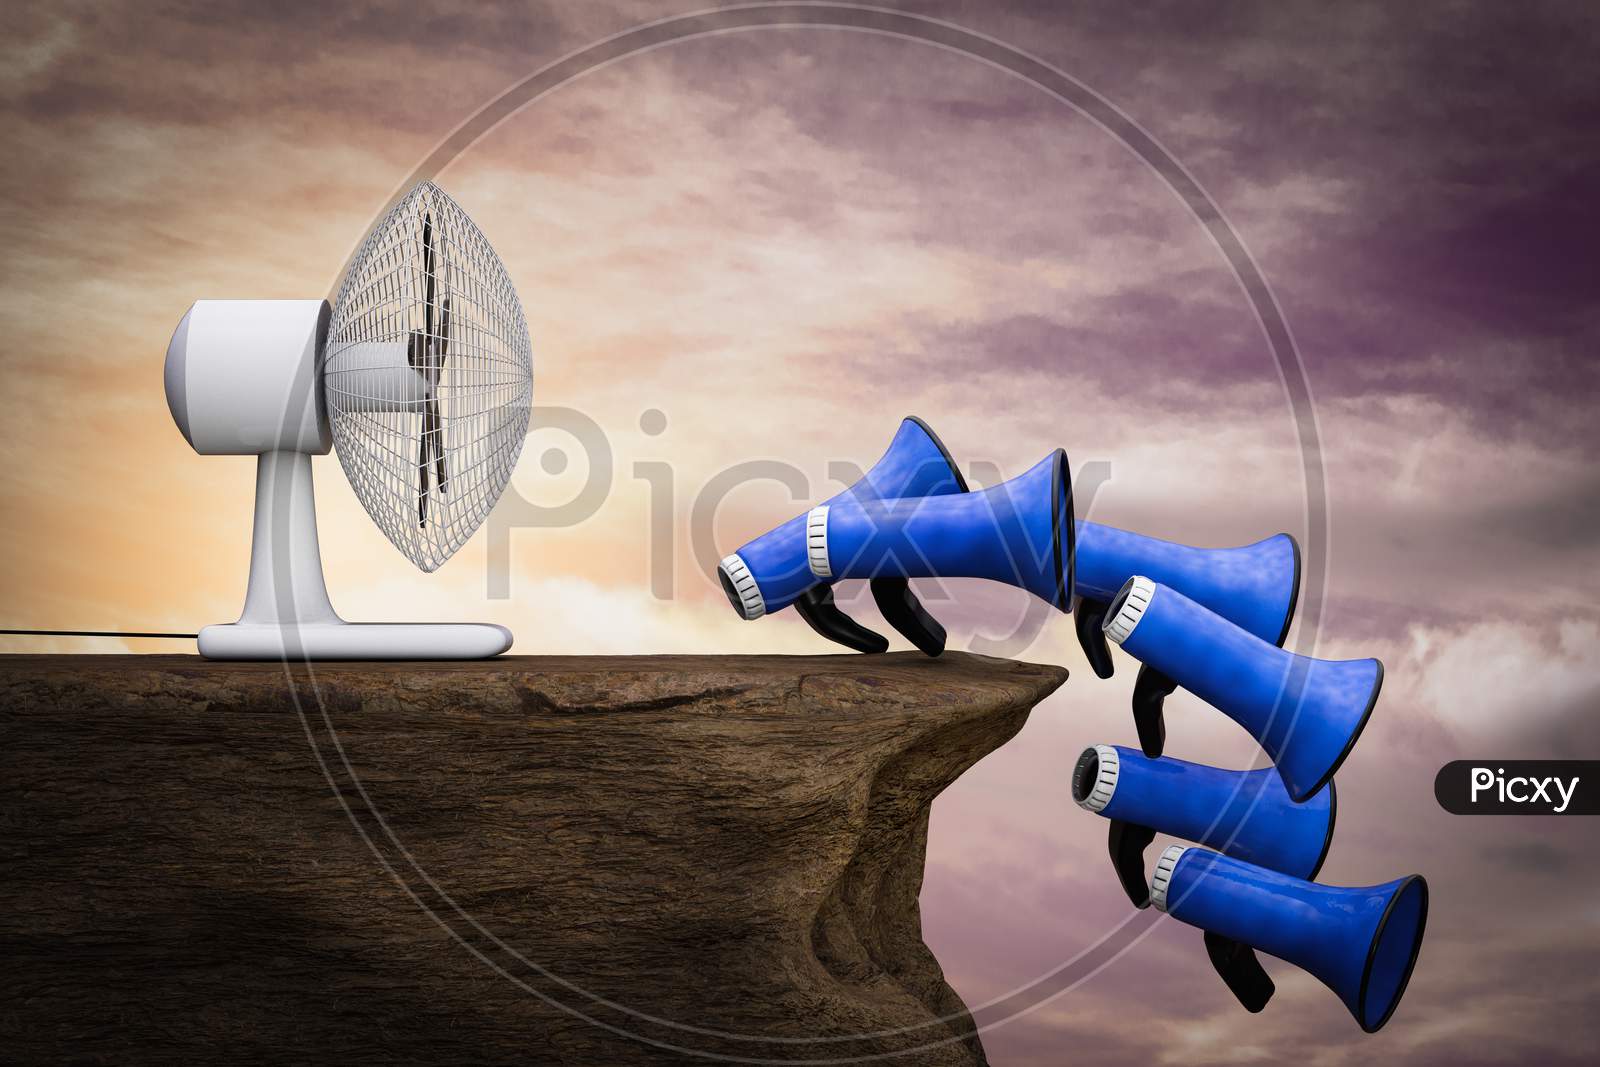 A Fan Blows Many Loudspeakers On Cliff At Sunset Magenta Day. Refer A Friend Concept. 3D Illustration